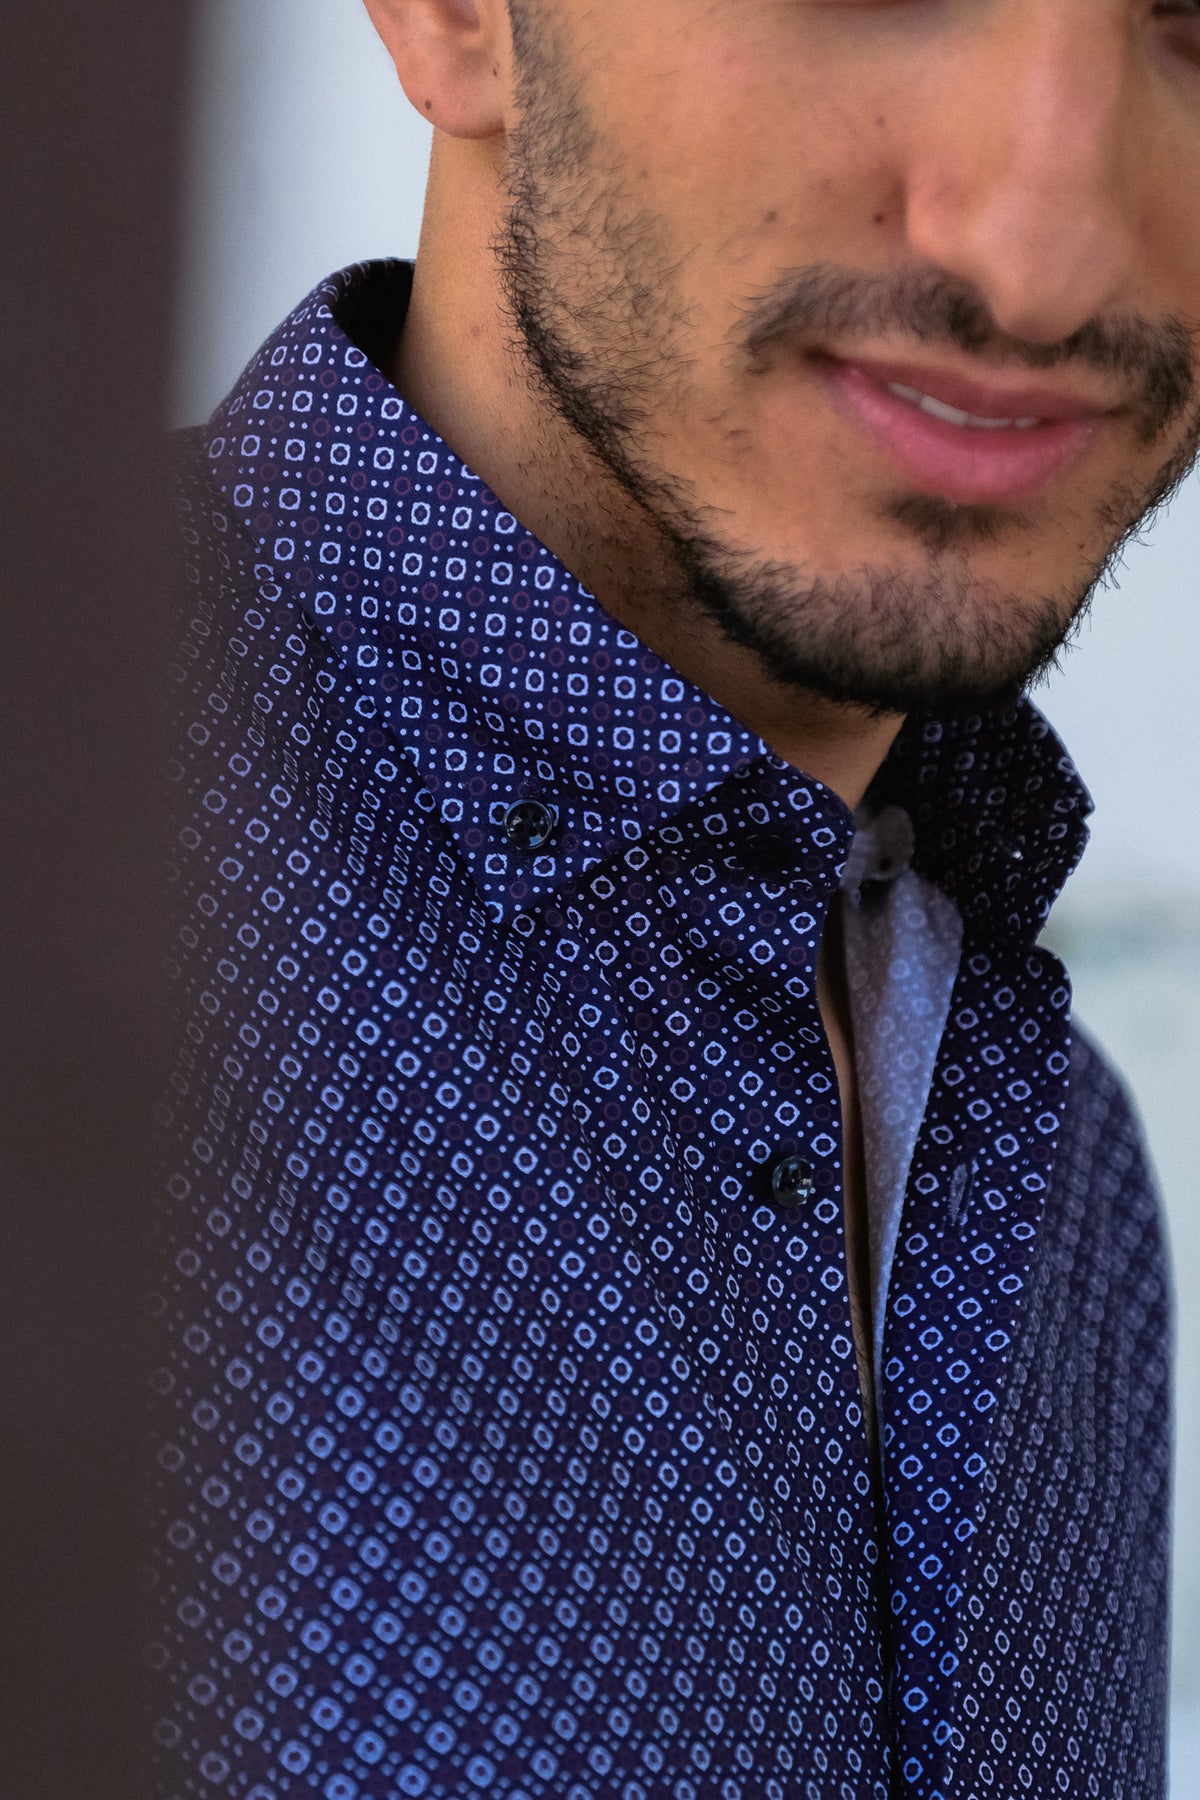 Printed casual shirt with graphic pattern in navy/white/red (Art. 2117-C)